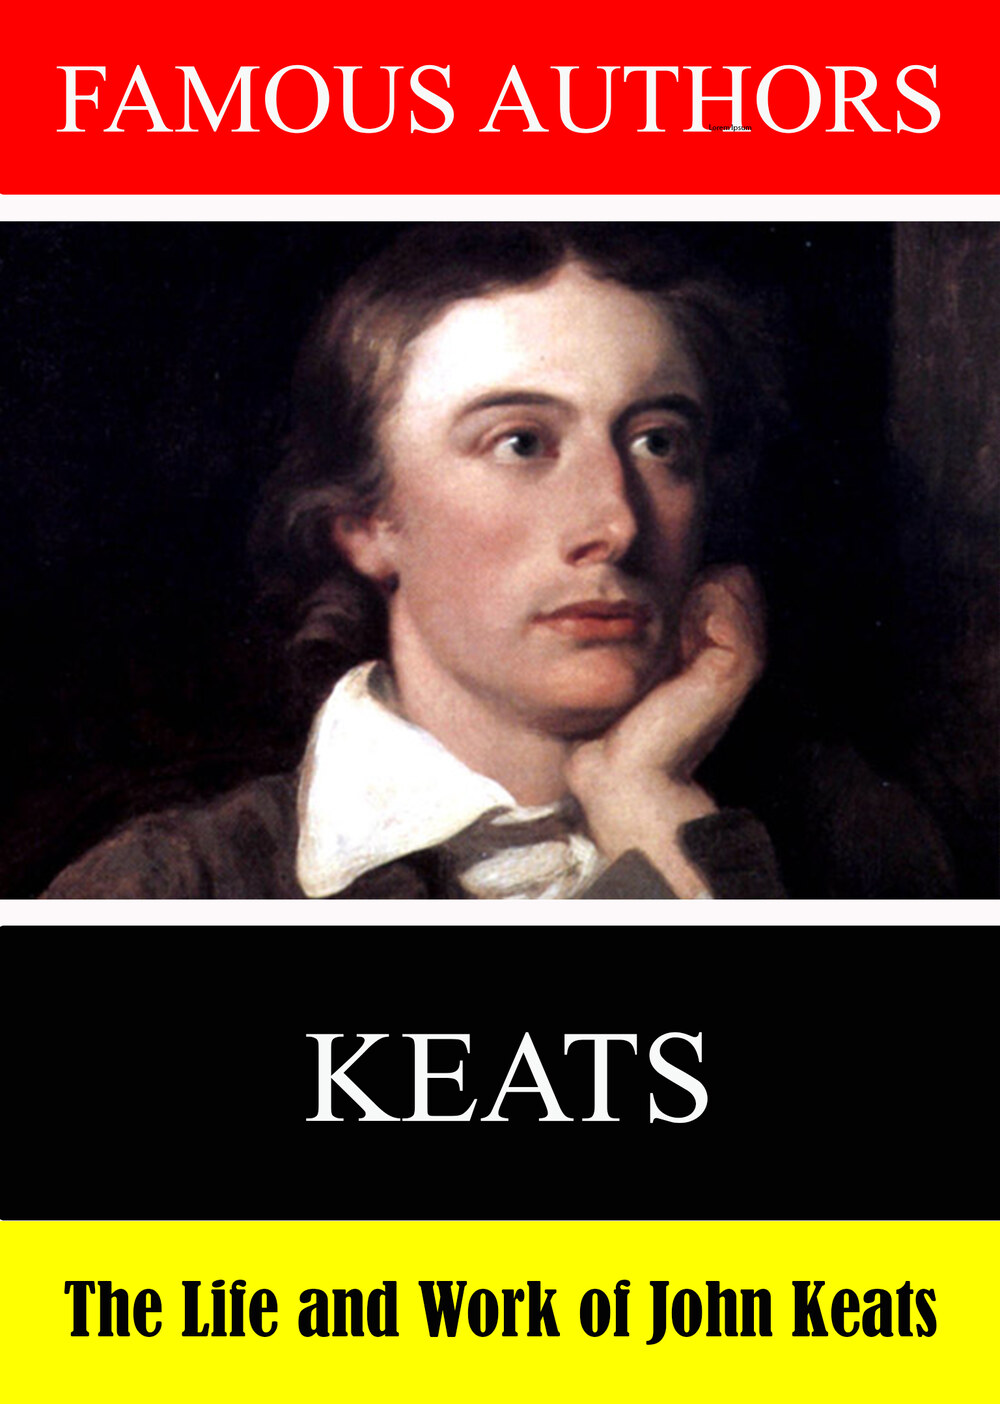 L7895 - Famous Authors: The Life and Work of John Keats